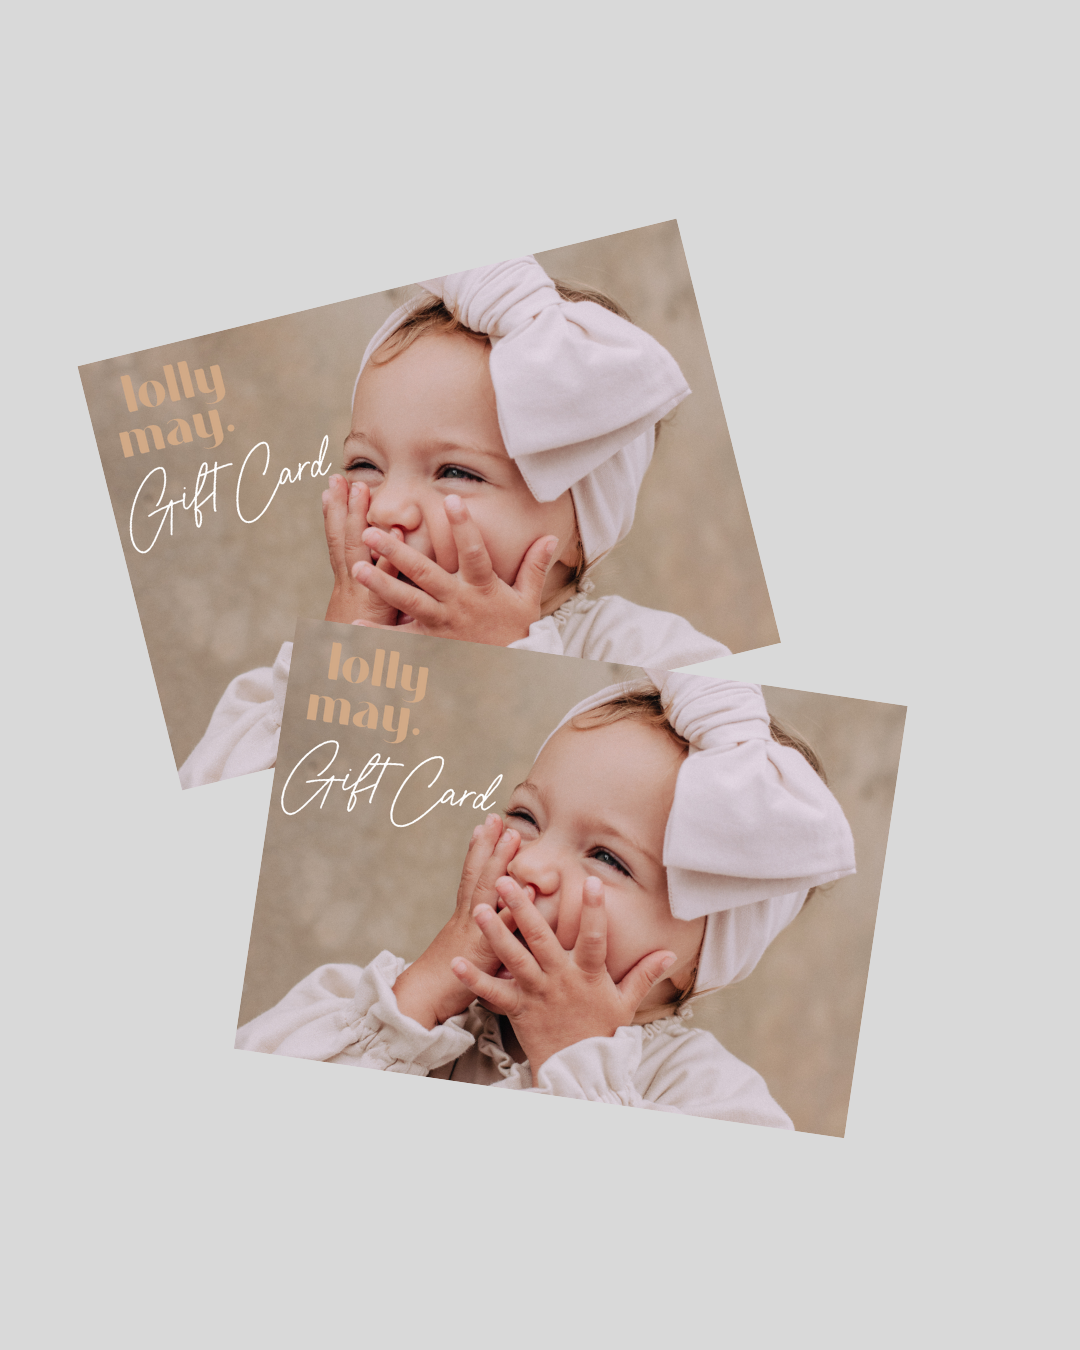 Lolly May Gift Card